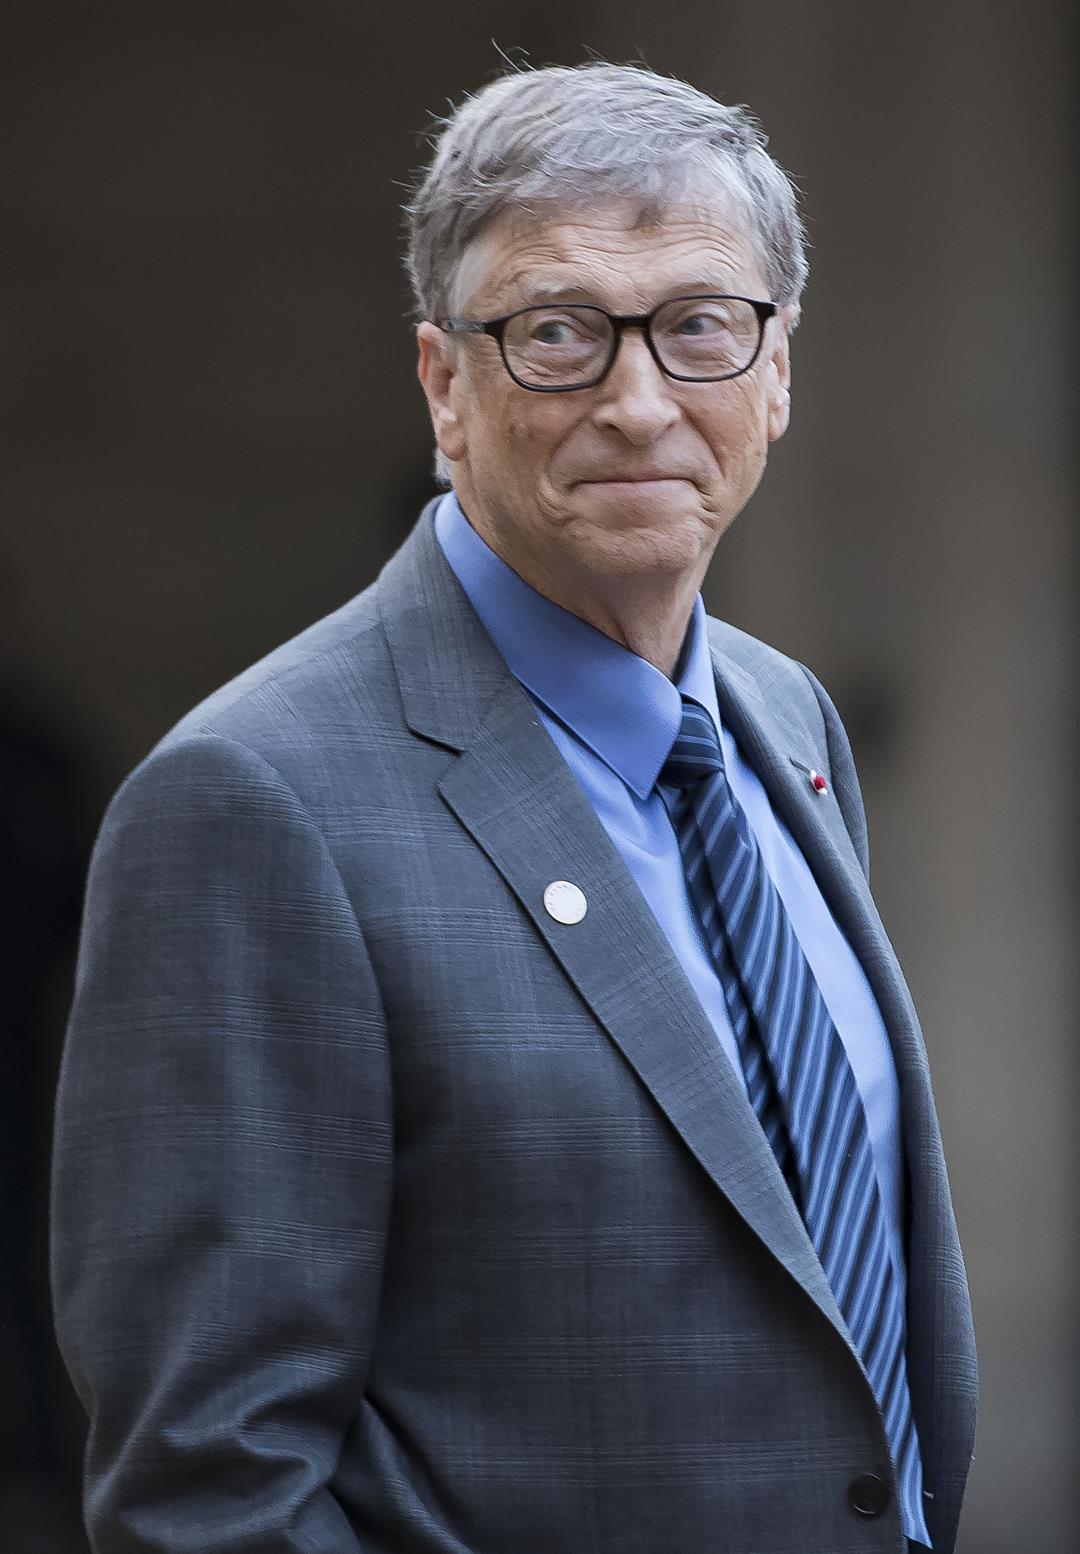 Bill Gates Sees the World in These 4 Income Levels